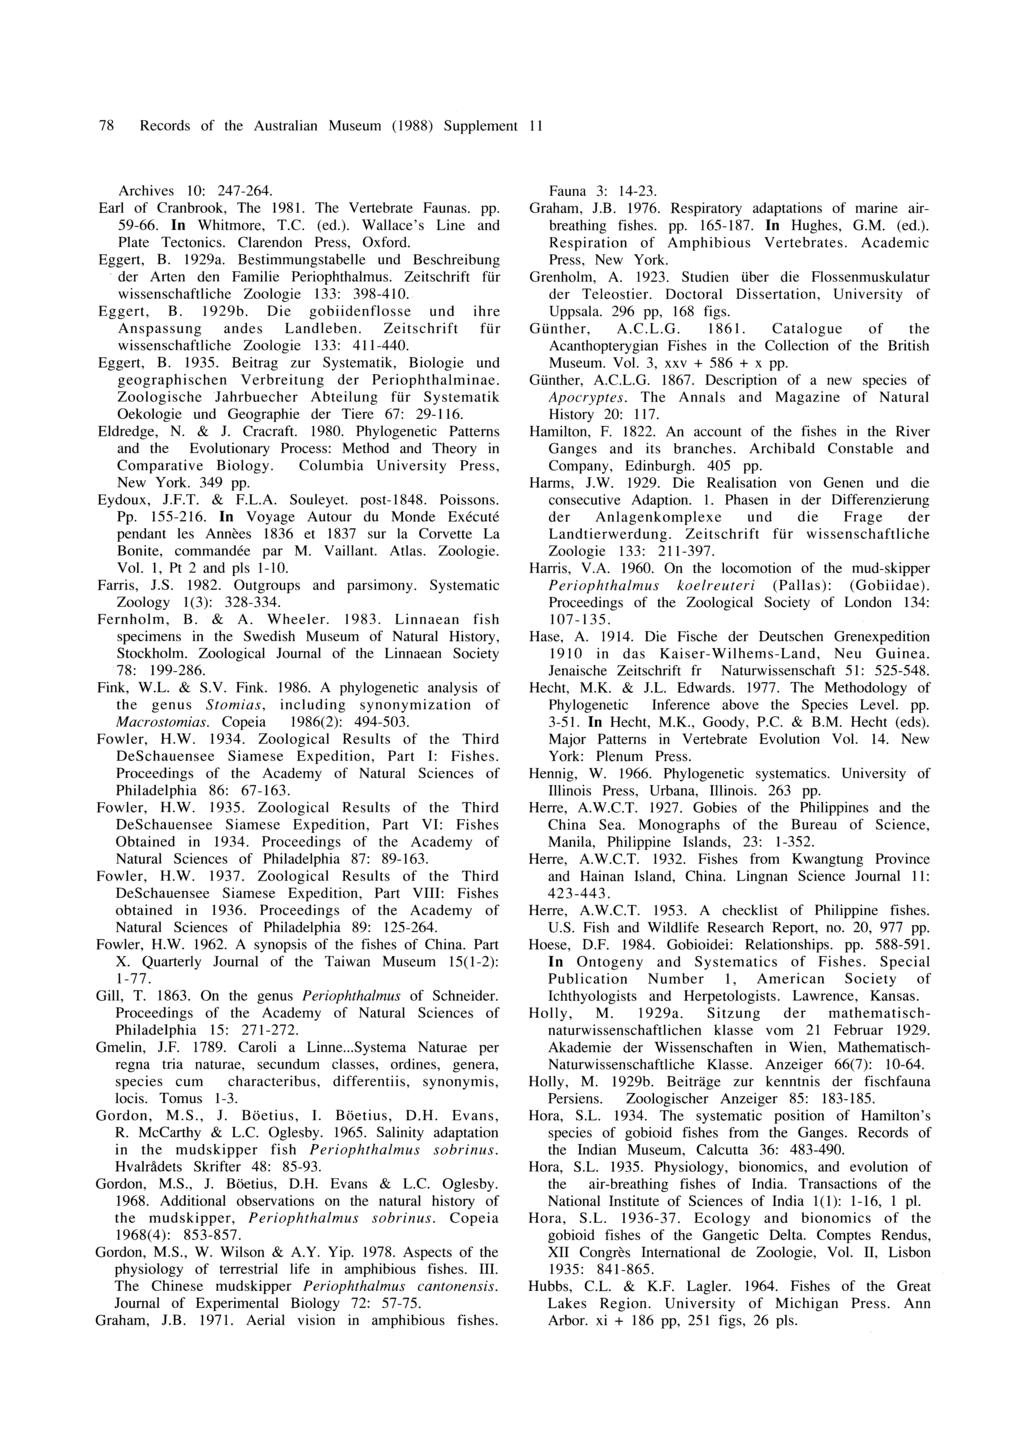 78 Records of the Australian Museum (1988) Supplement II Archives : 247-264. Earl of Cranbrook, The 1981. The Vertebrate Faunas. pp. 59-66. In Whitmore, T.e. (ed.). Wallace's Line and Plate Tectonics.